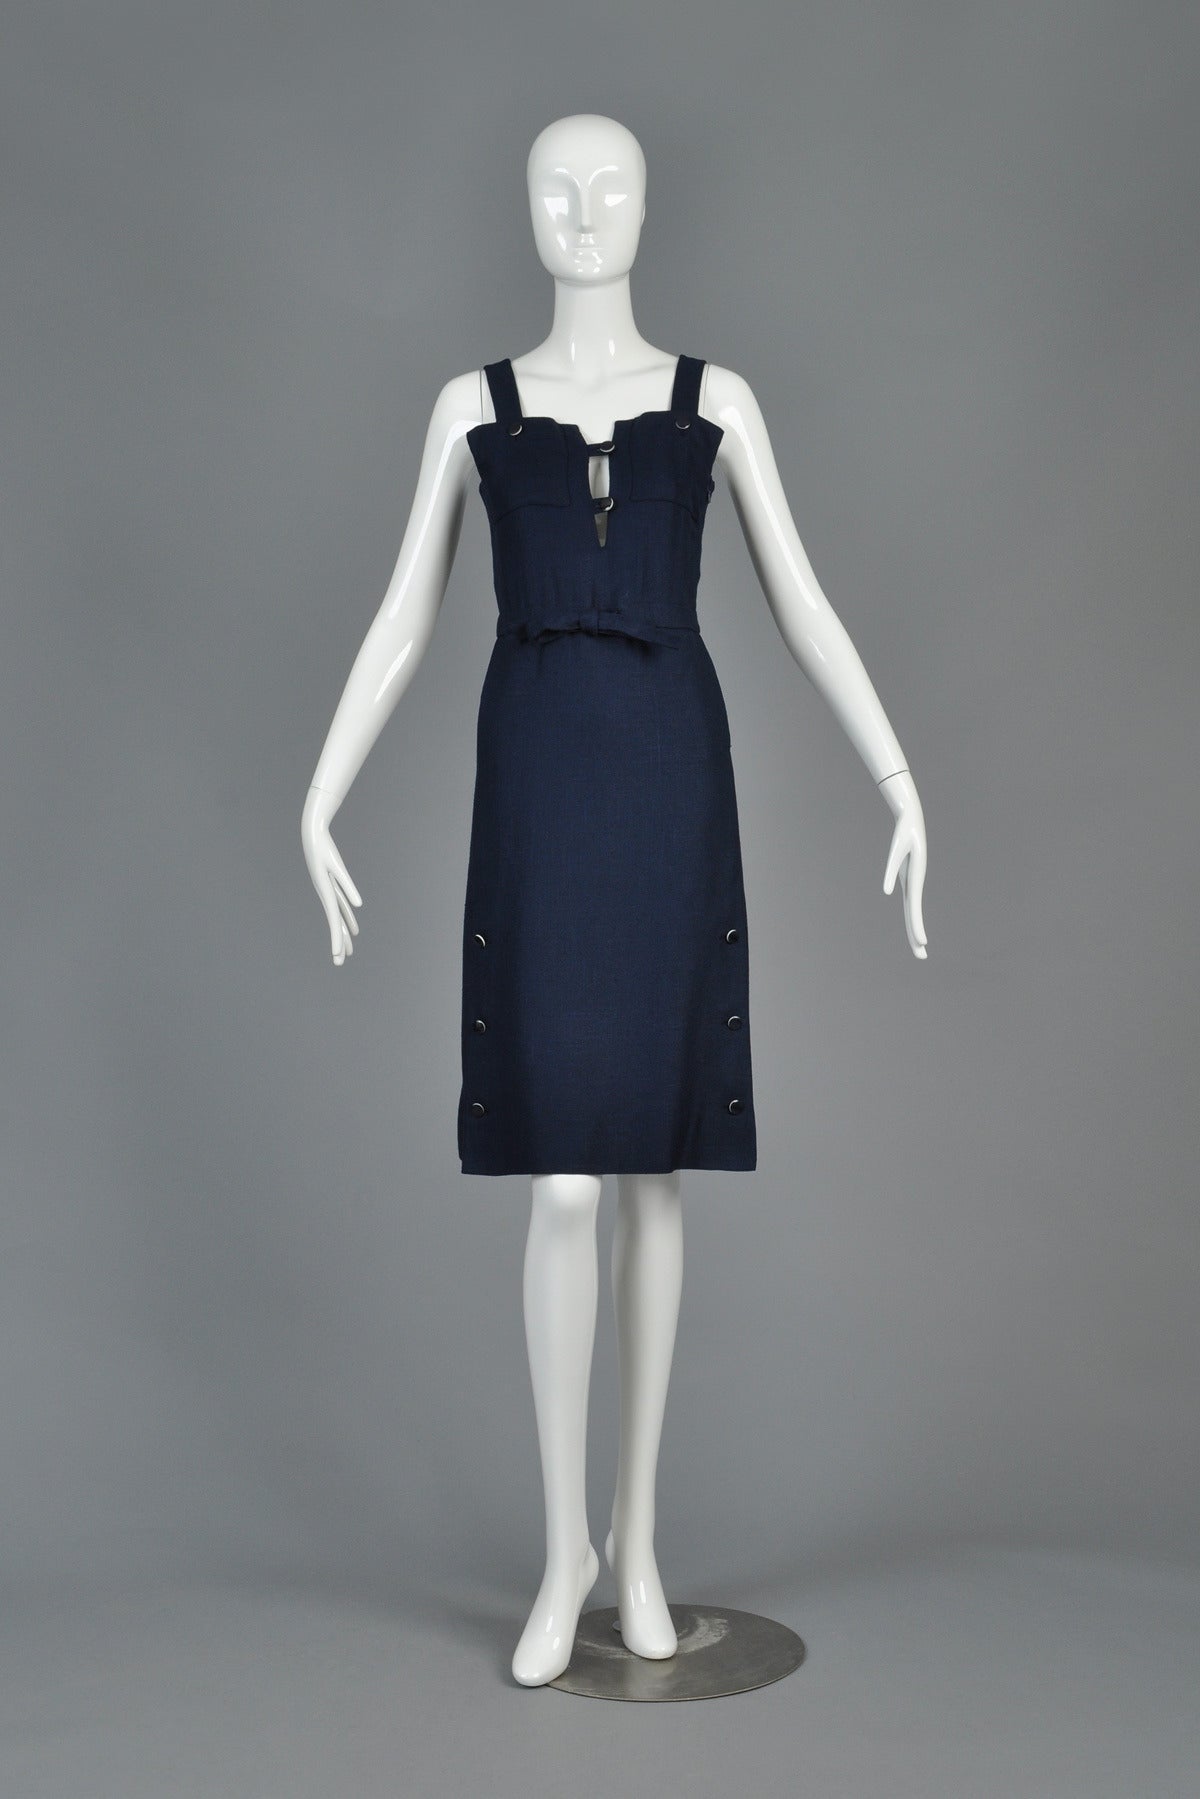 Insanely cute vintage 60s/1970s dress by Andre Courrèges. So many great details! Navy snaps with white edging at hem + bust. “Overall/jumper construction with big square pockets at bust. Loop button closures at plunging, notched neckline. Faux